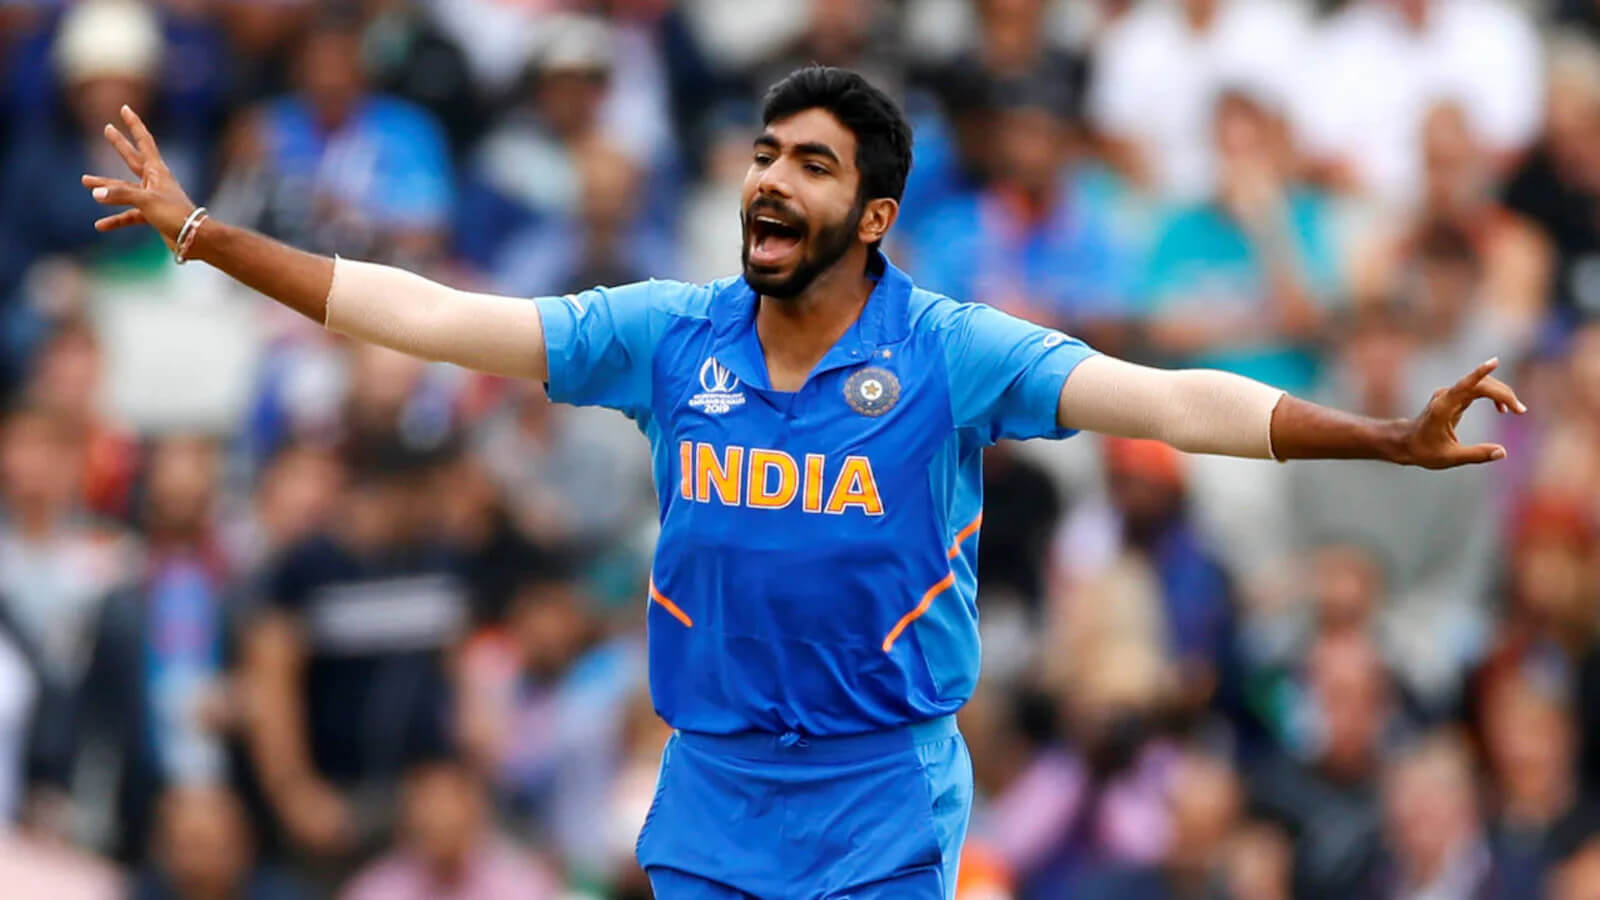 Bumrah Makes World Cup History By Taking The First Wicket Against Australia